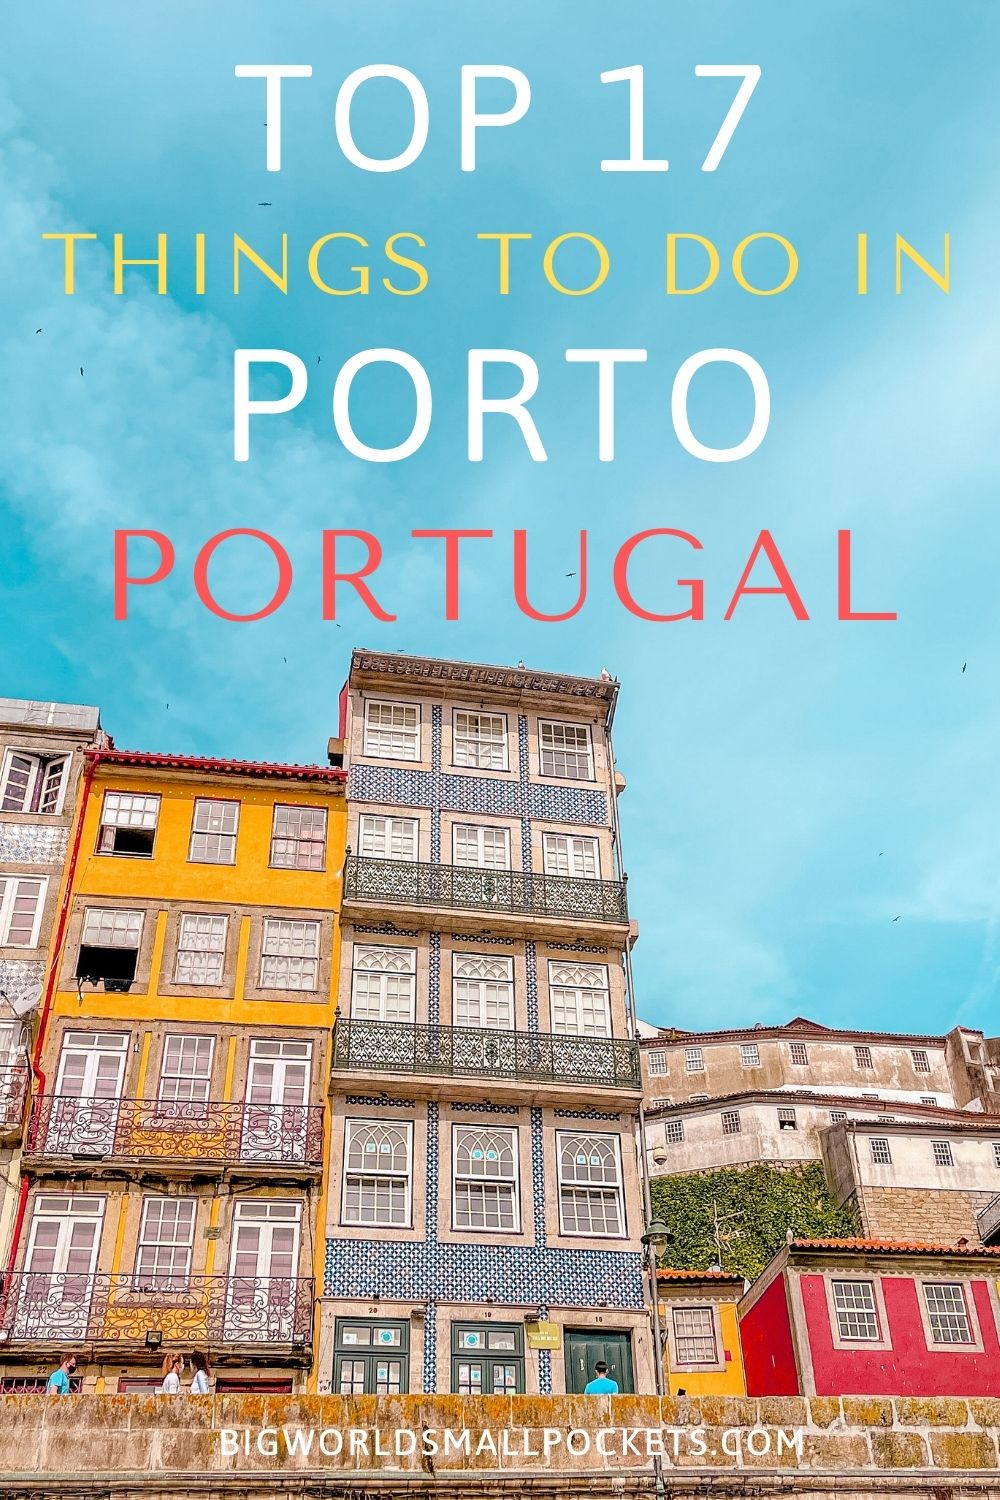 Top 17 Things to Do in Porto, Portugal